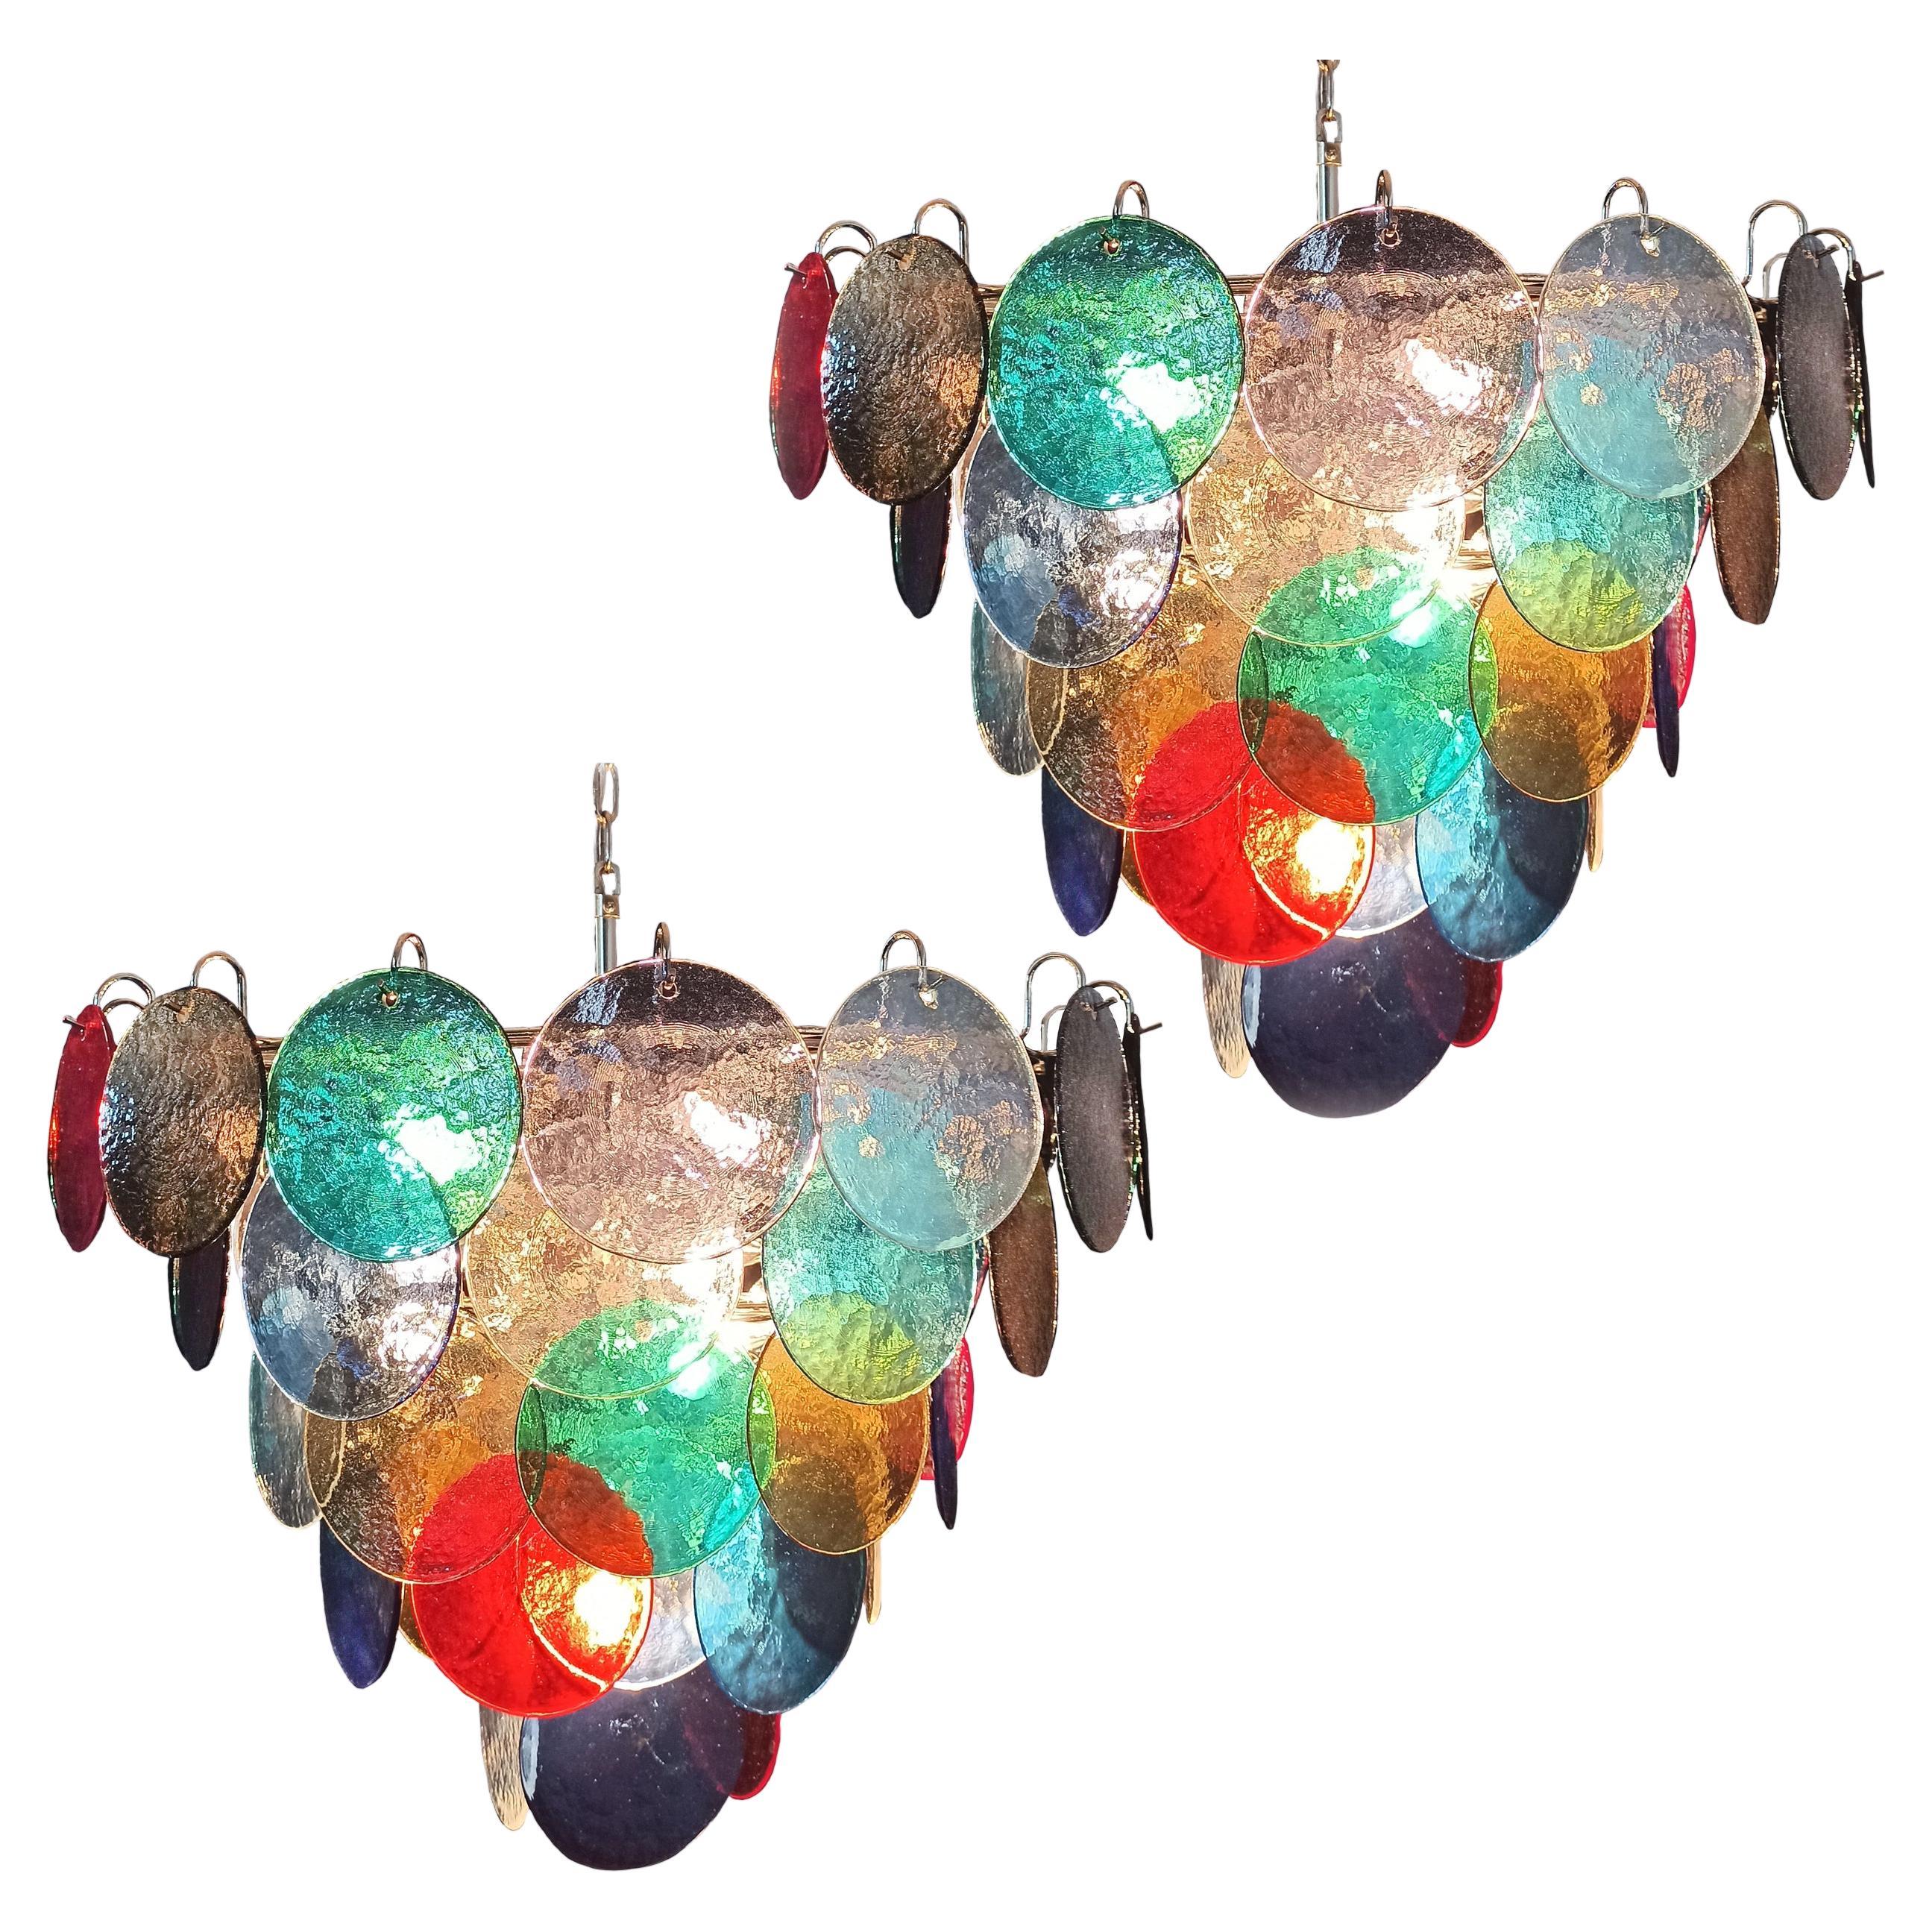 Scenic High quality Murano chandeliers space age - 57 MULTICOLORED glasses For Sale